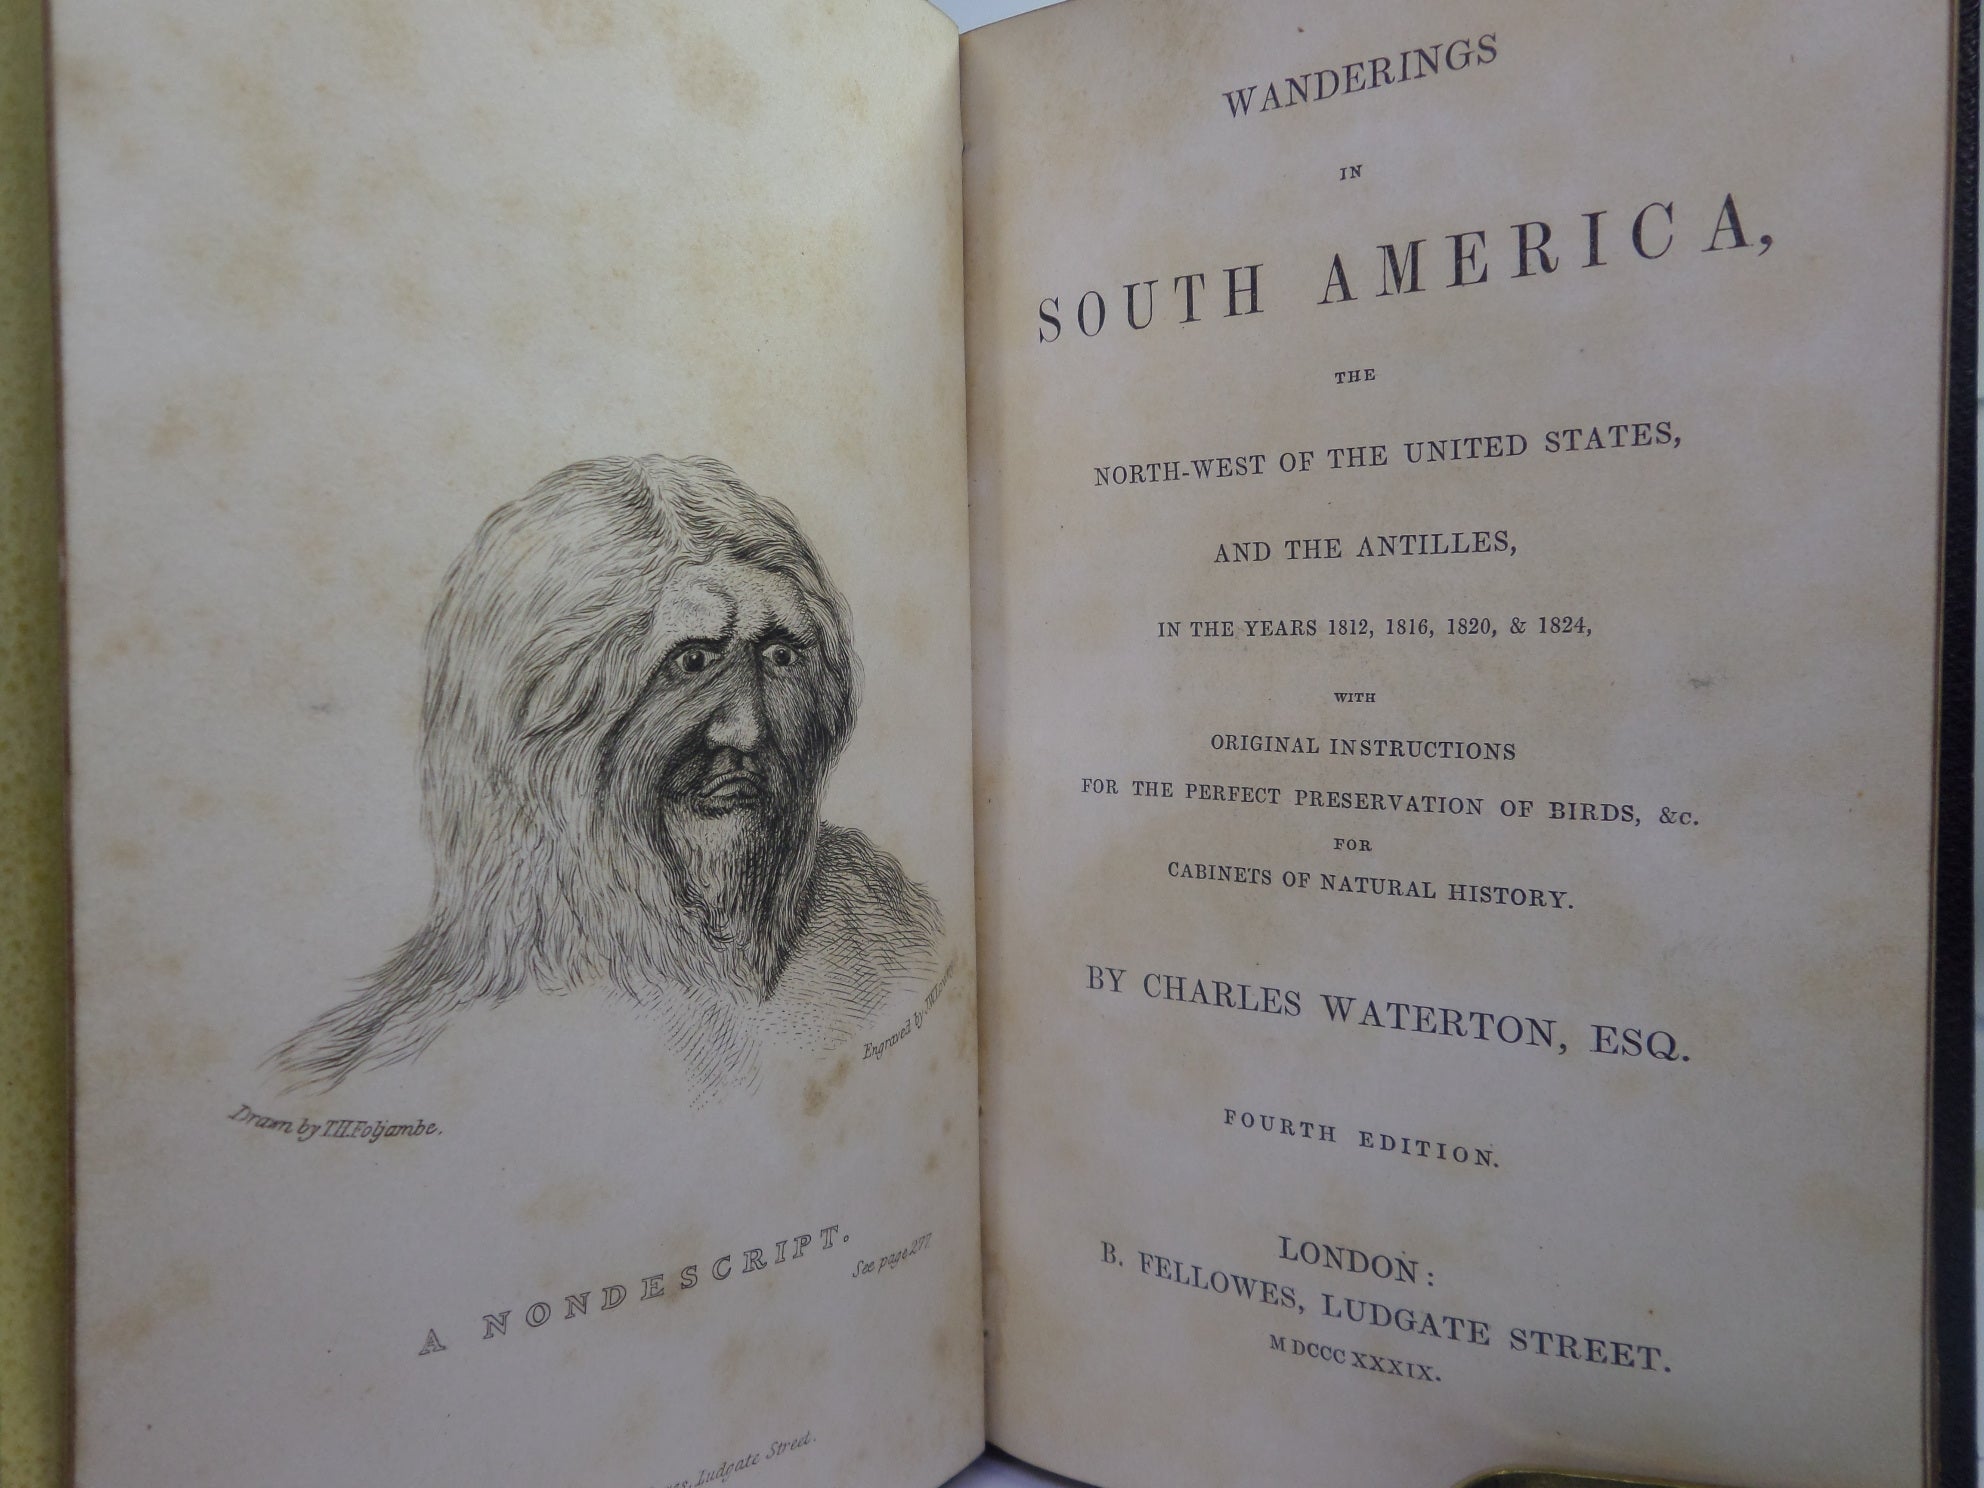 WANDERINGS IN SOUTH AMERICA BY CHARLES WATERTON 1839 FOURTH EDITION, LEATHER-BOUND